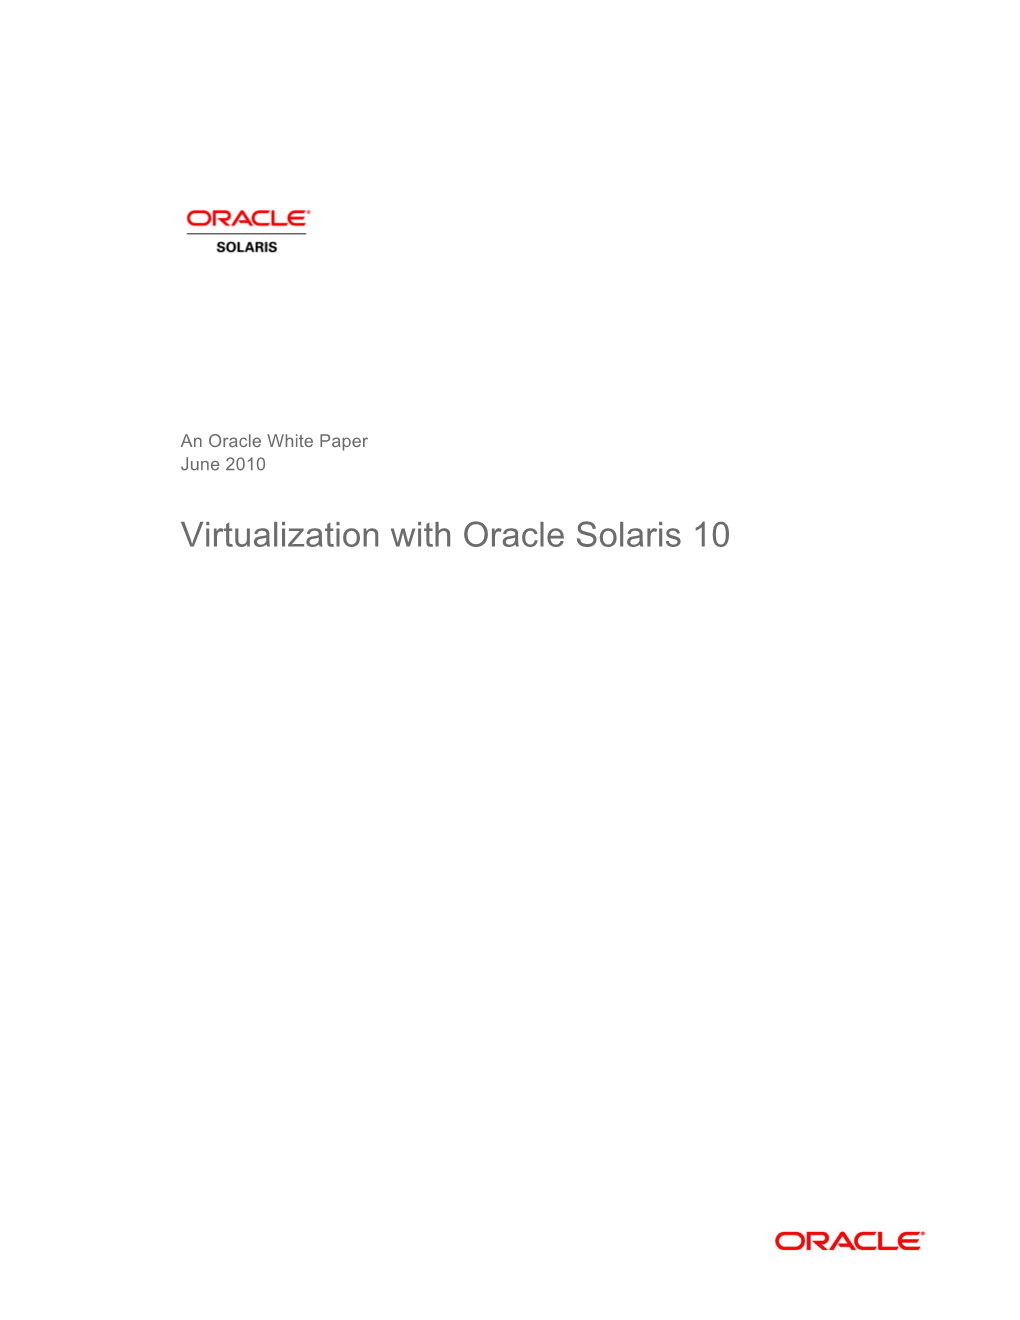 White Paper: Virtualization with Oracle Solaris 10